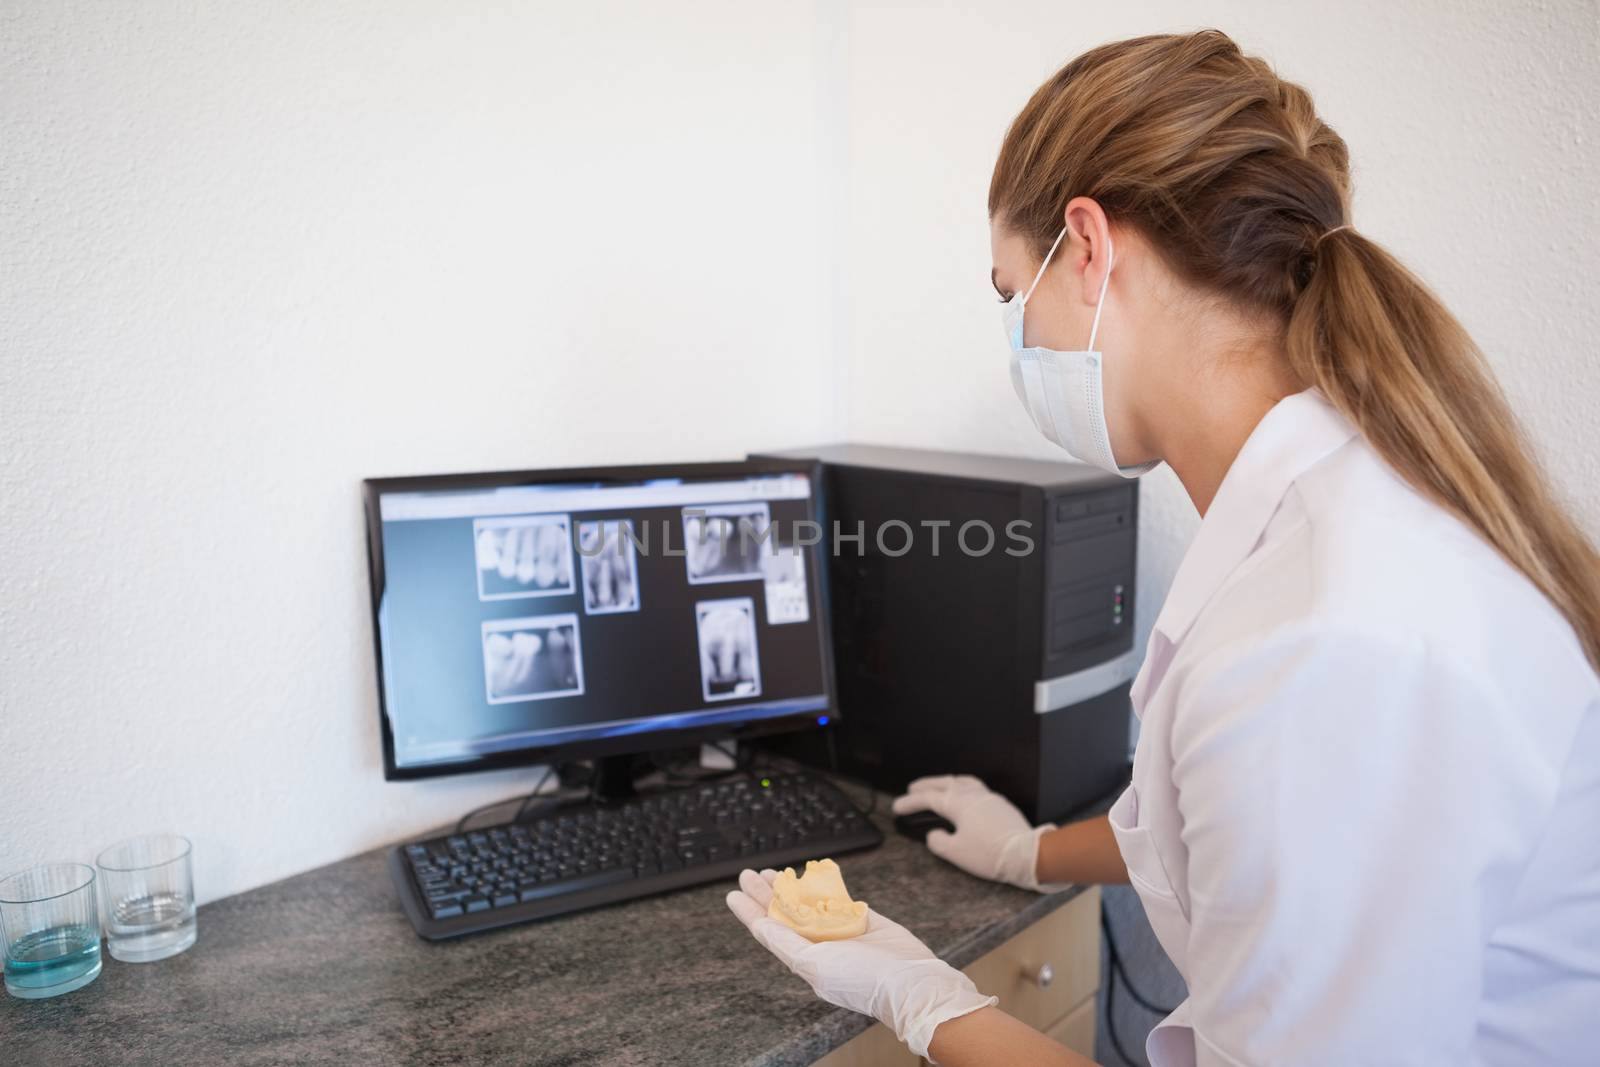 Dental assistant looking at x-rays on computer by Wavebreakmedia